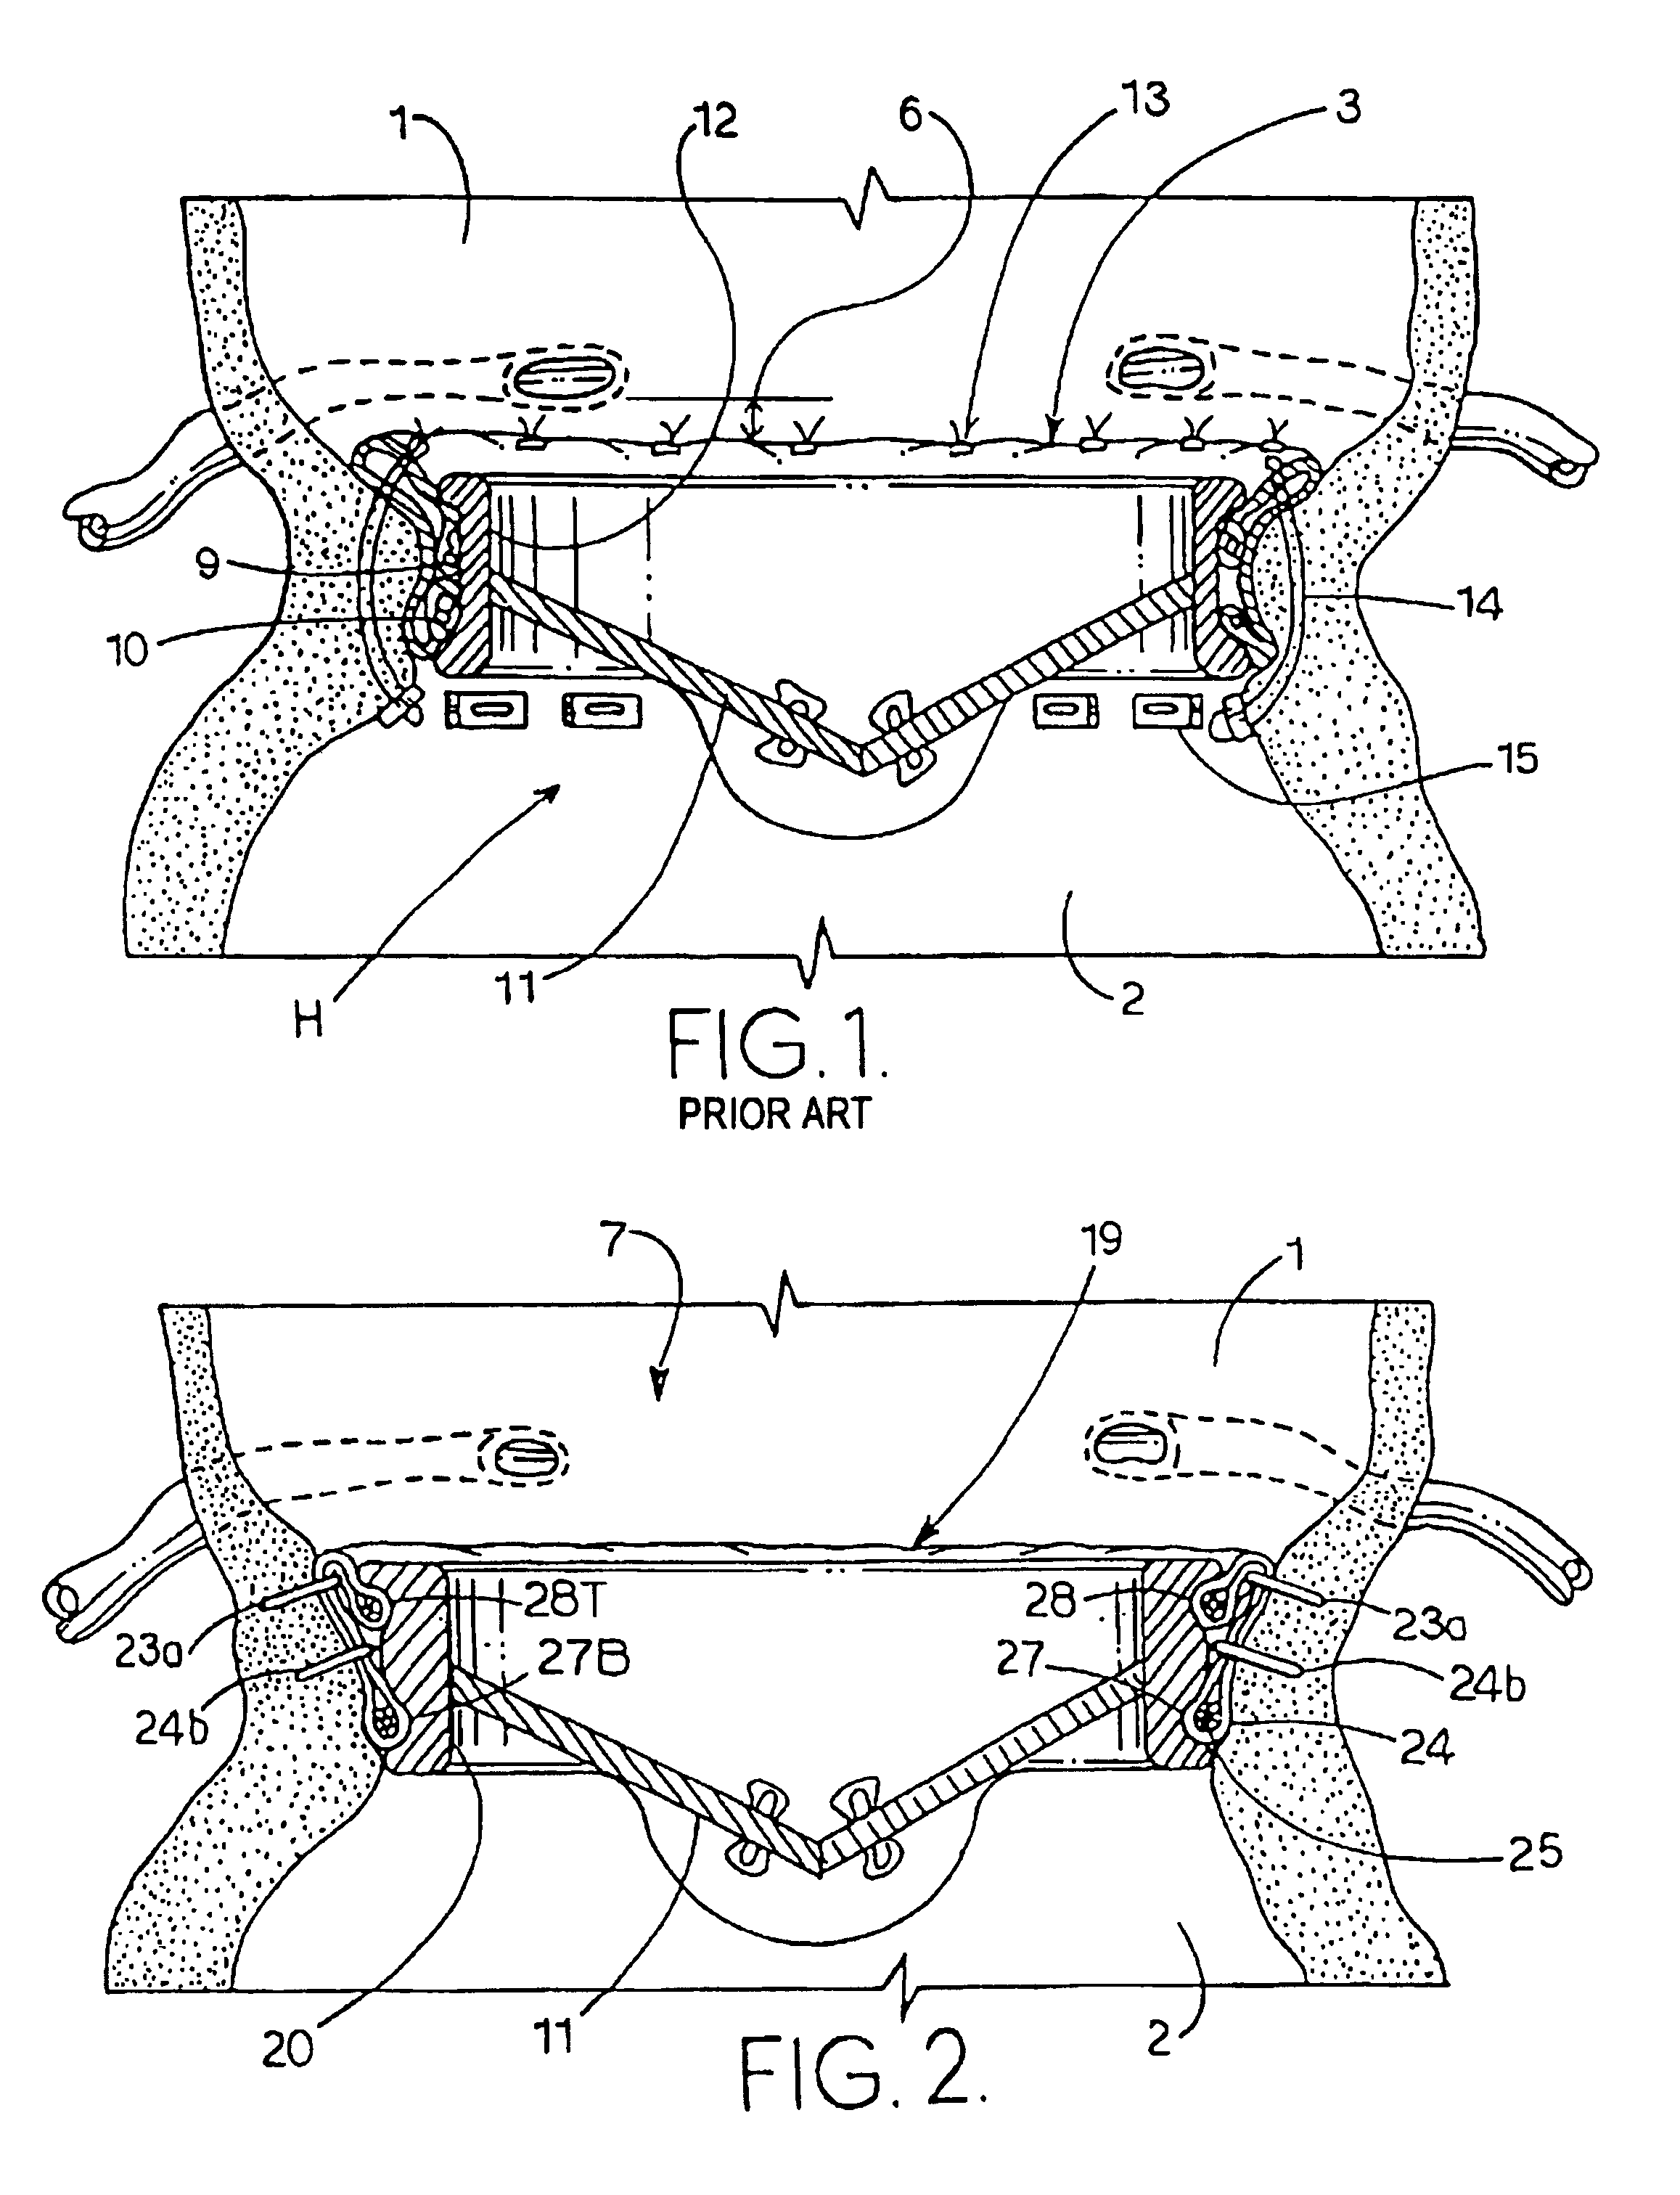 Means and method of replacing a heart valve in a minimally invasive manner